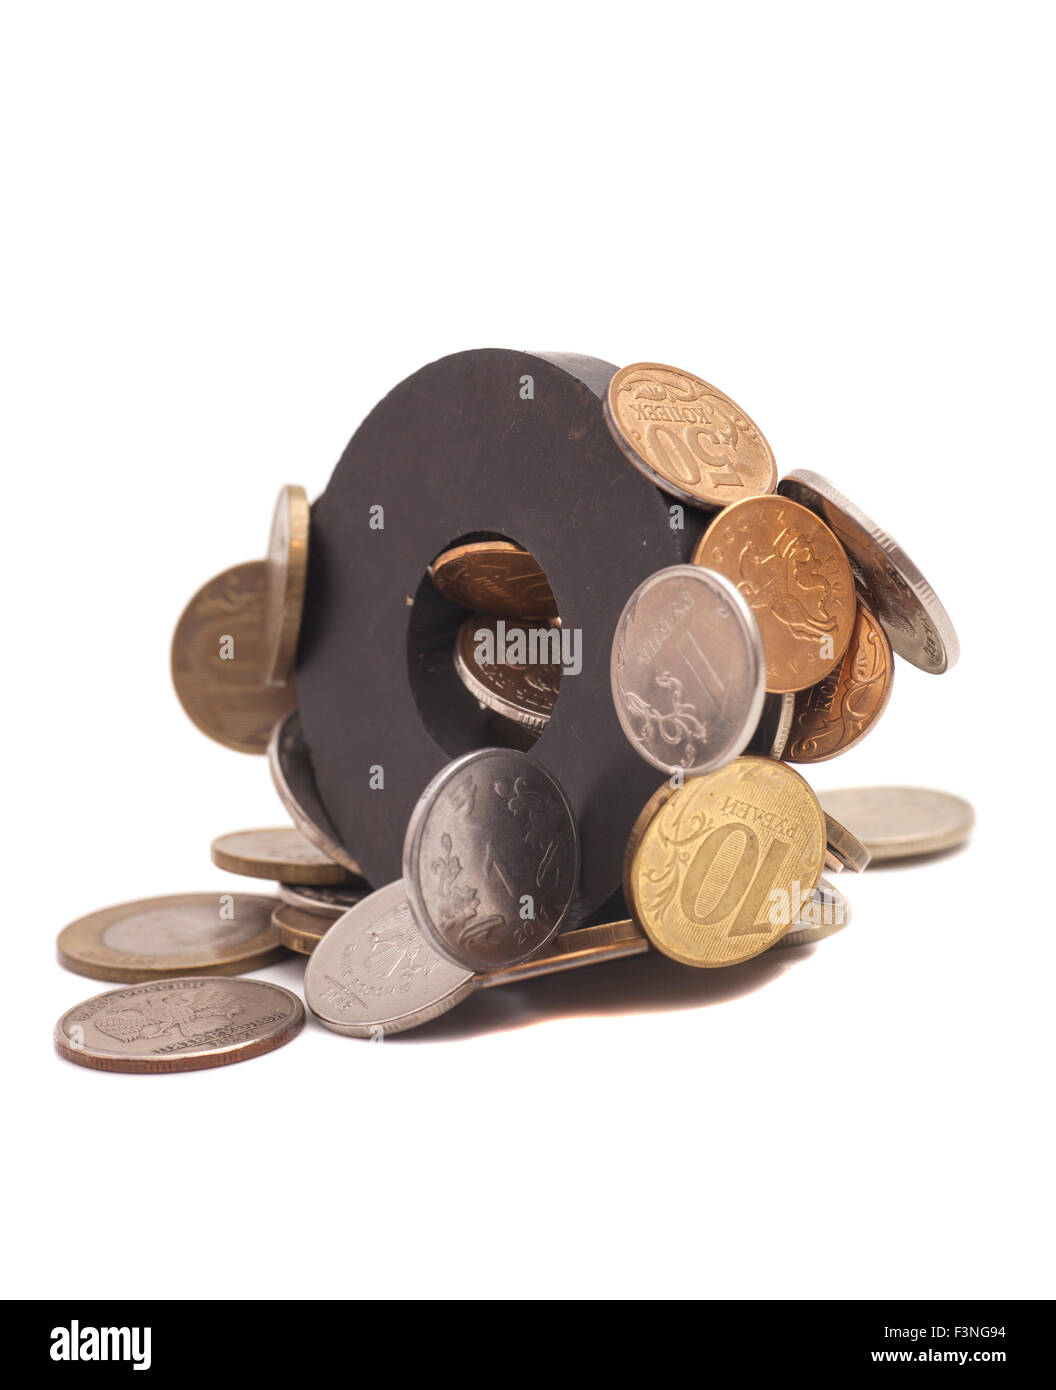 Coins attracted by magnet Stock Photo - Alamy